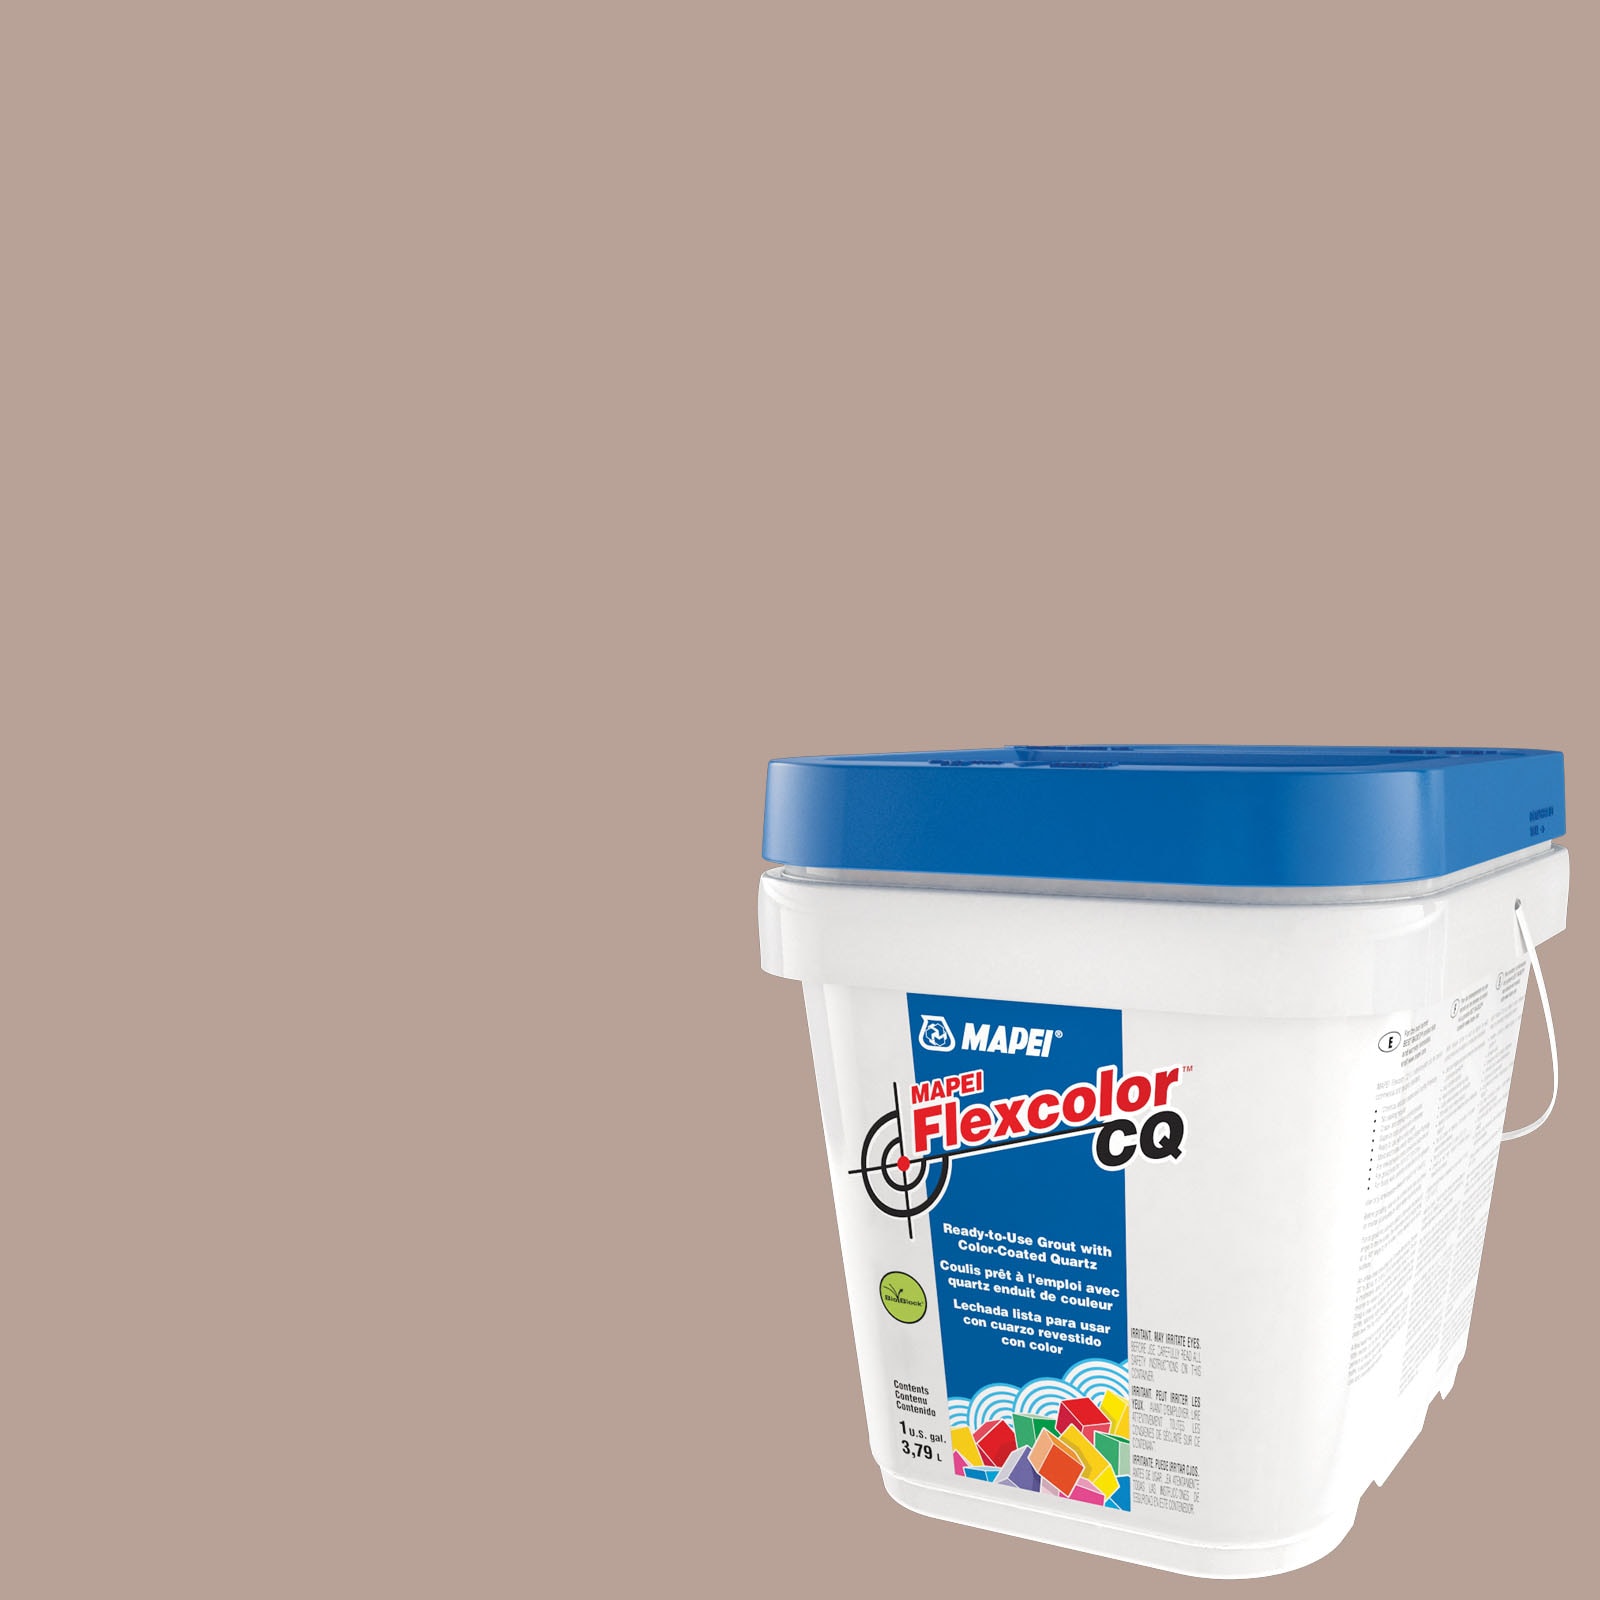 Flexcolor CQ Wicker #5224 Acrylic Premix Sanded Grout (1-Gallon) in Brown | - MAPEI 4KA522404